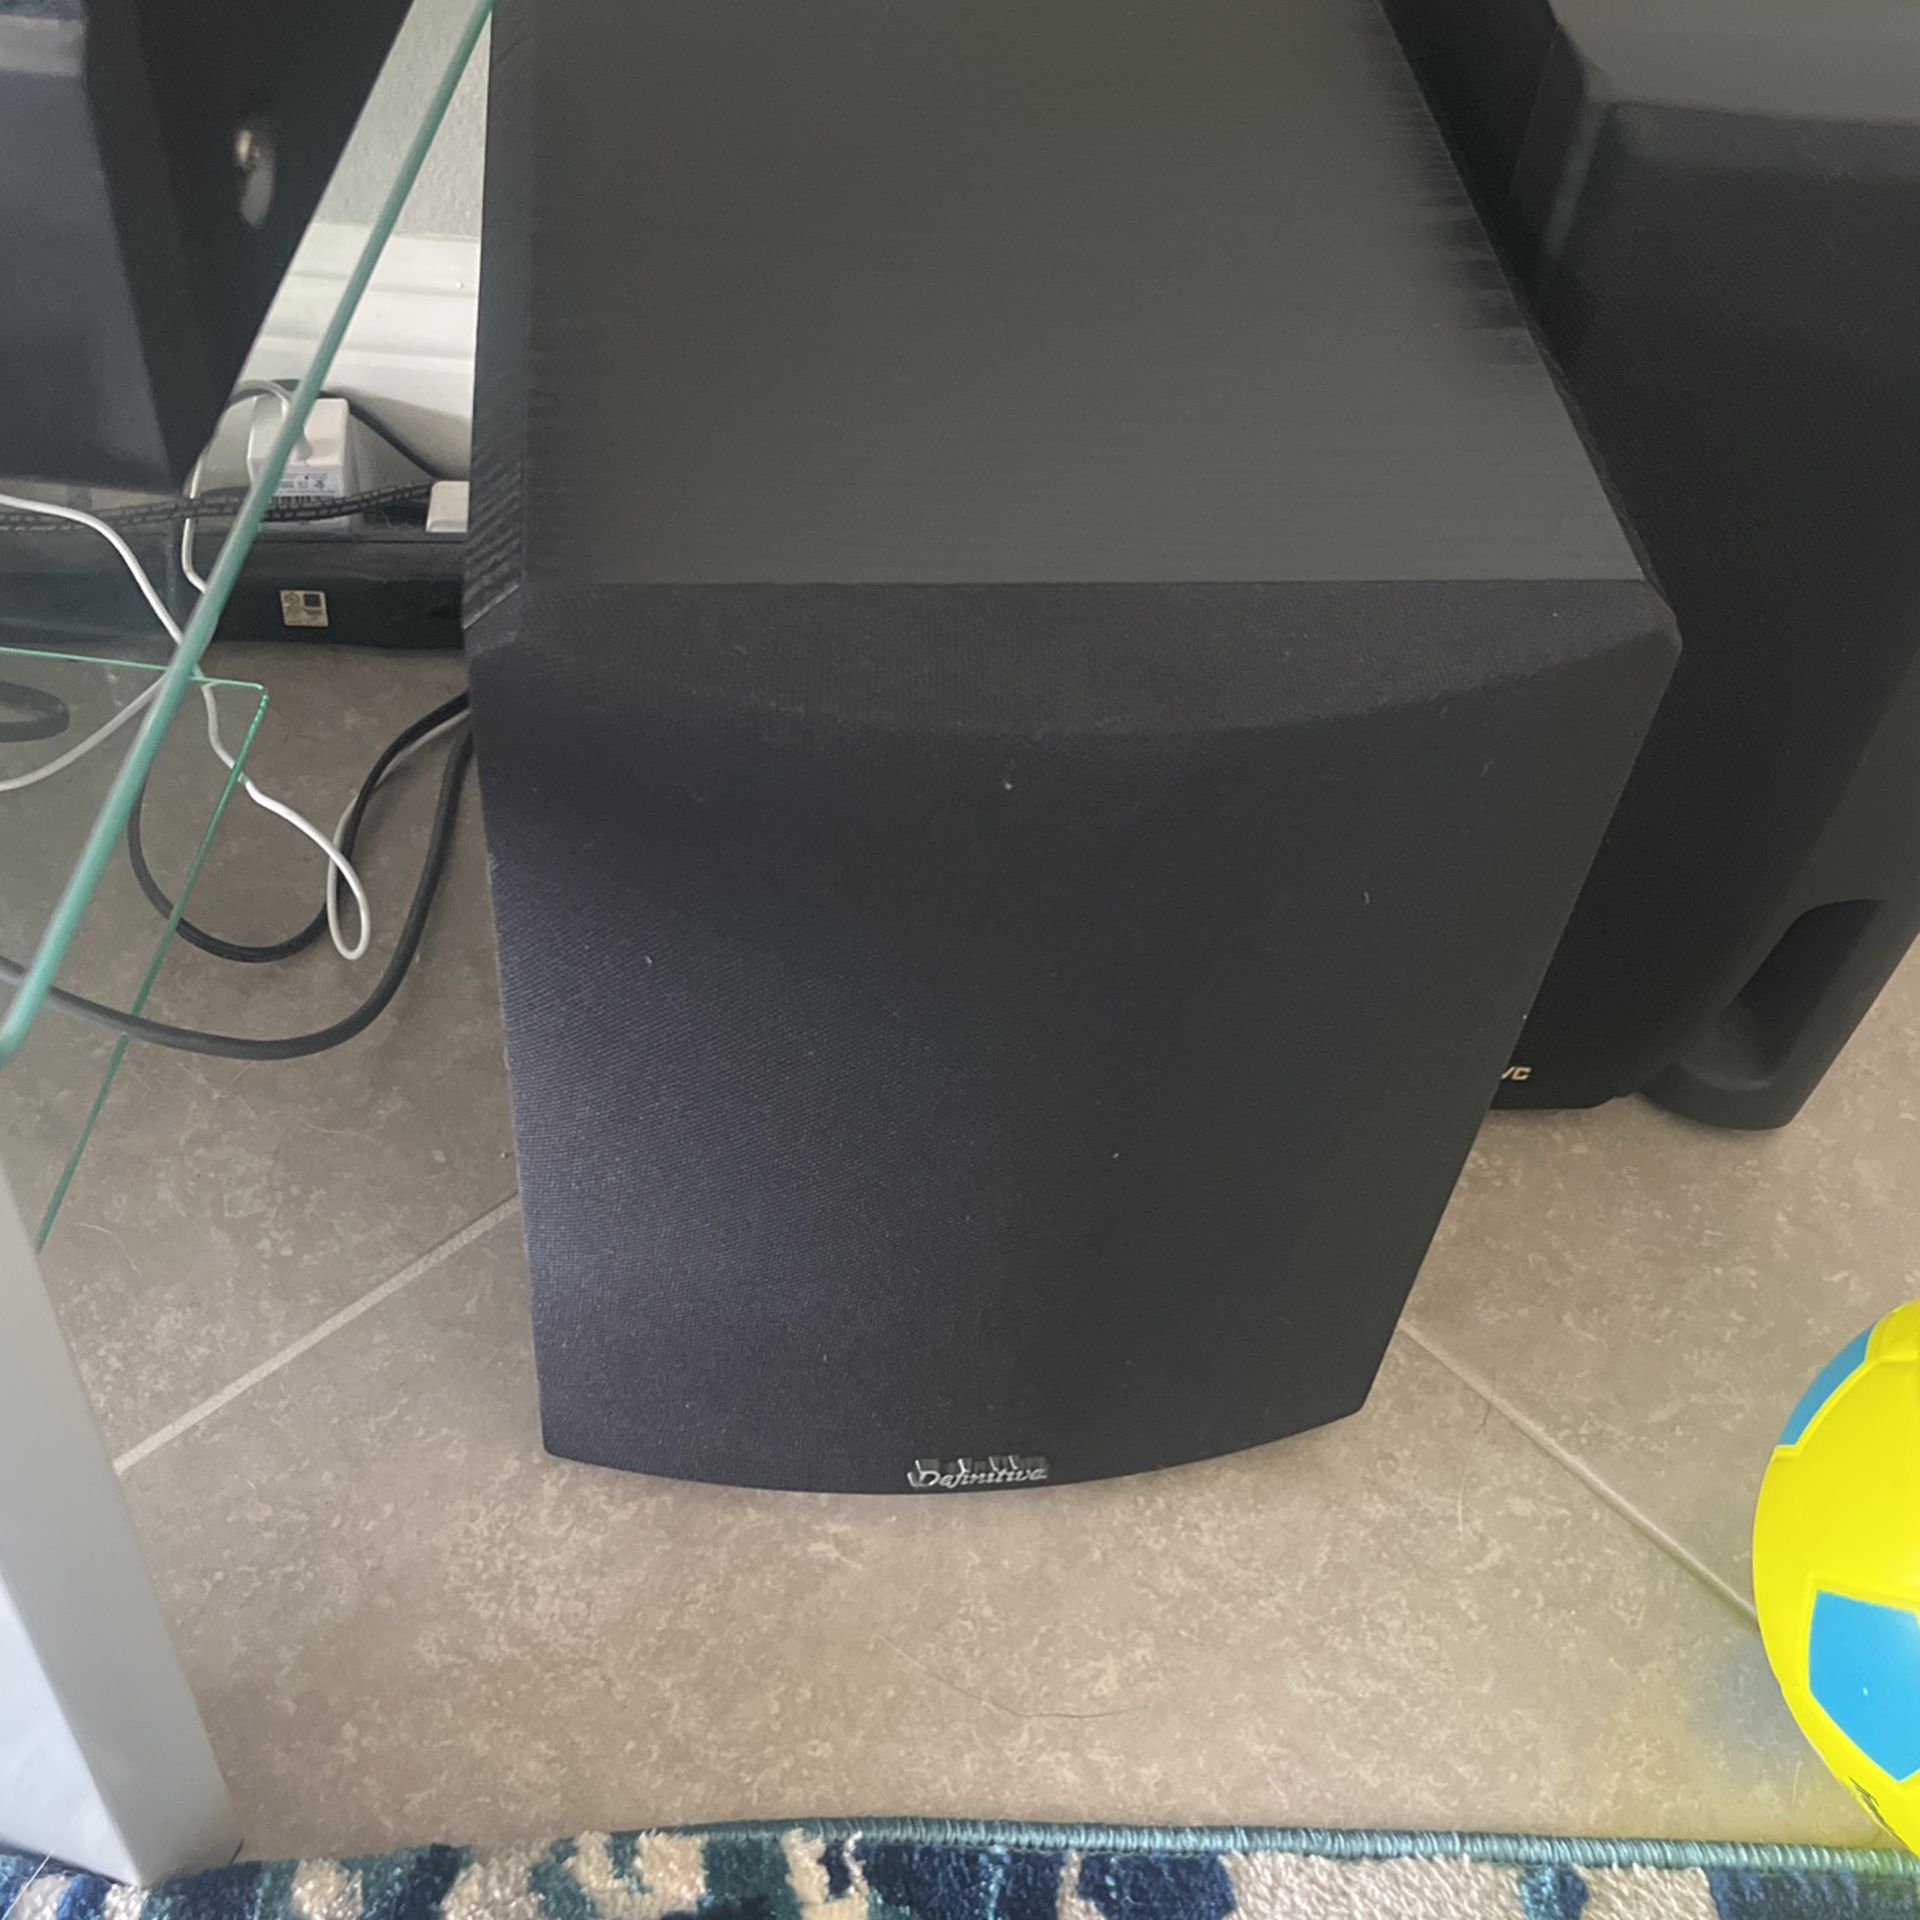 Definitive Subwoofer, DT-0028 and 8-inch